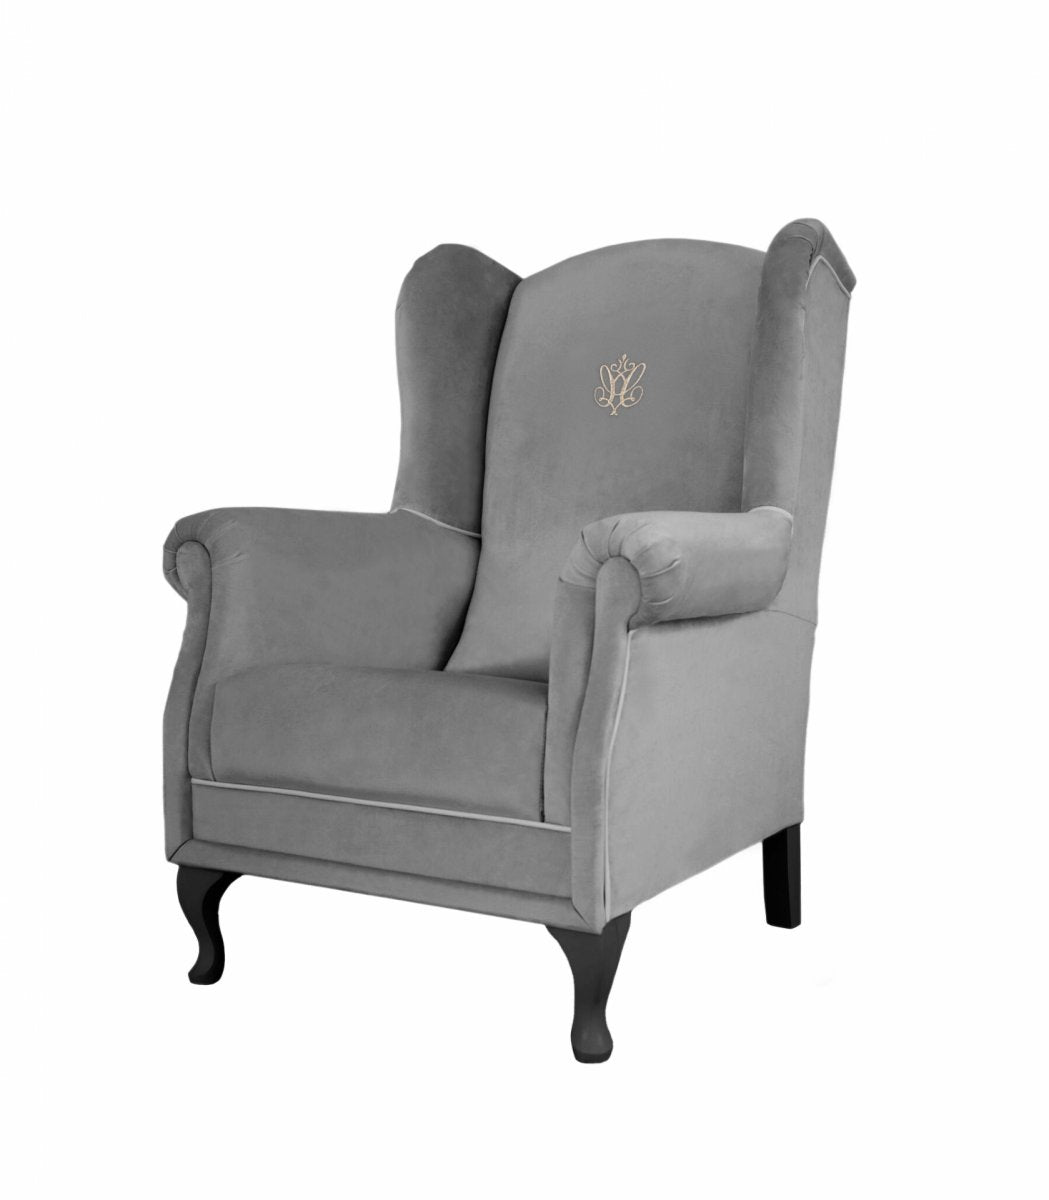 Anthracite Armchair with an Emblem